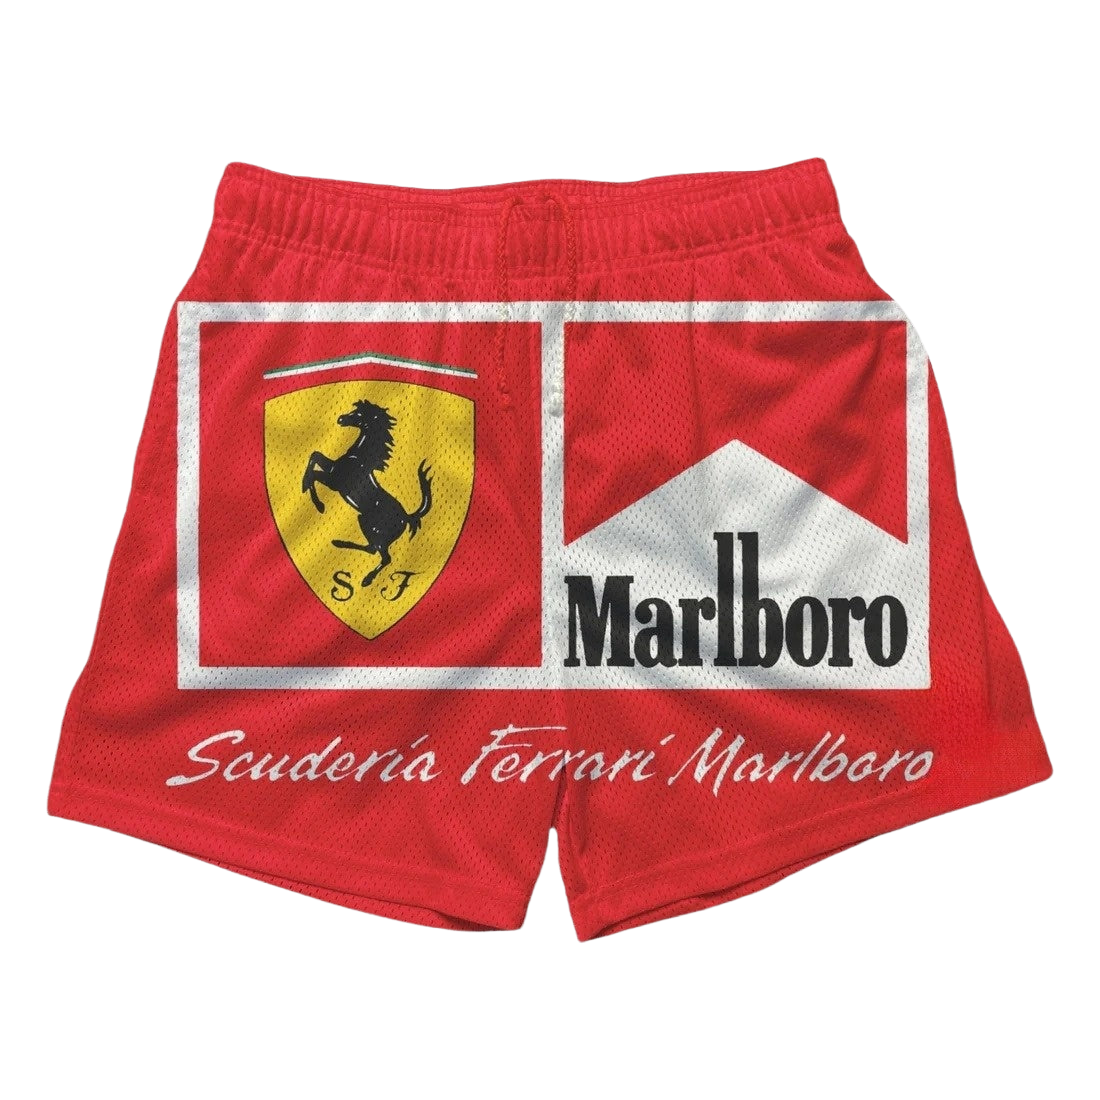 a red shorts with a black and white ferrari logo